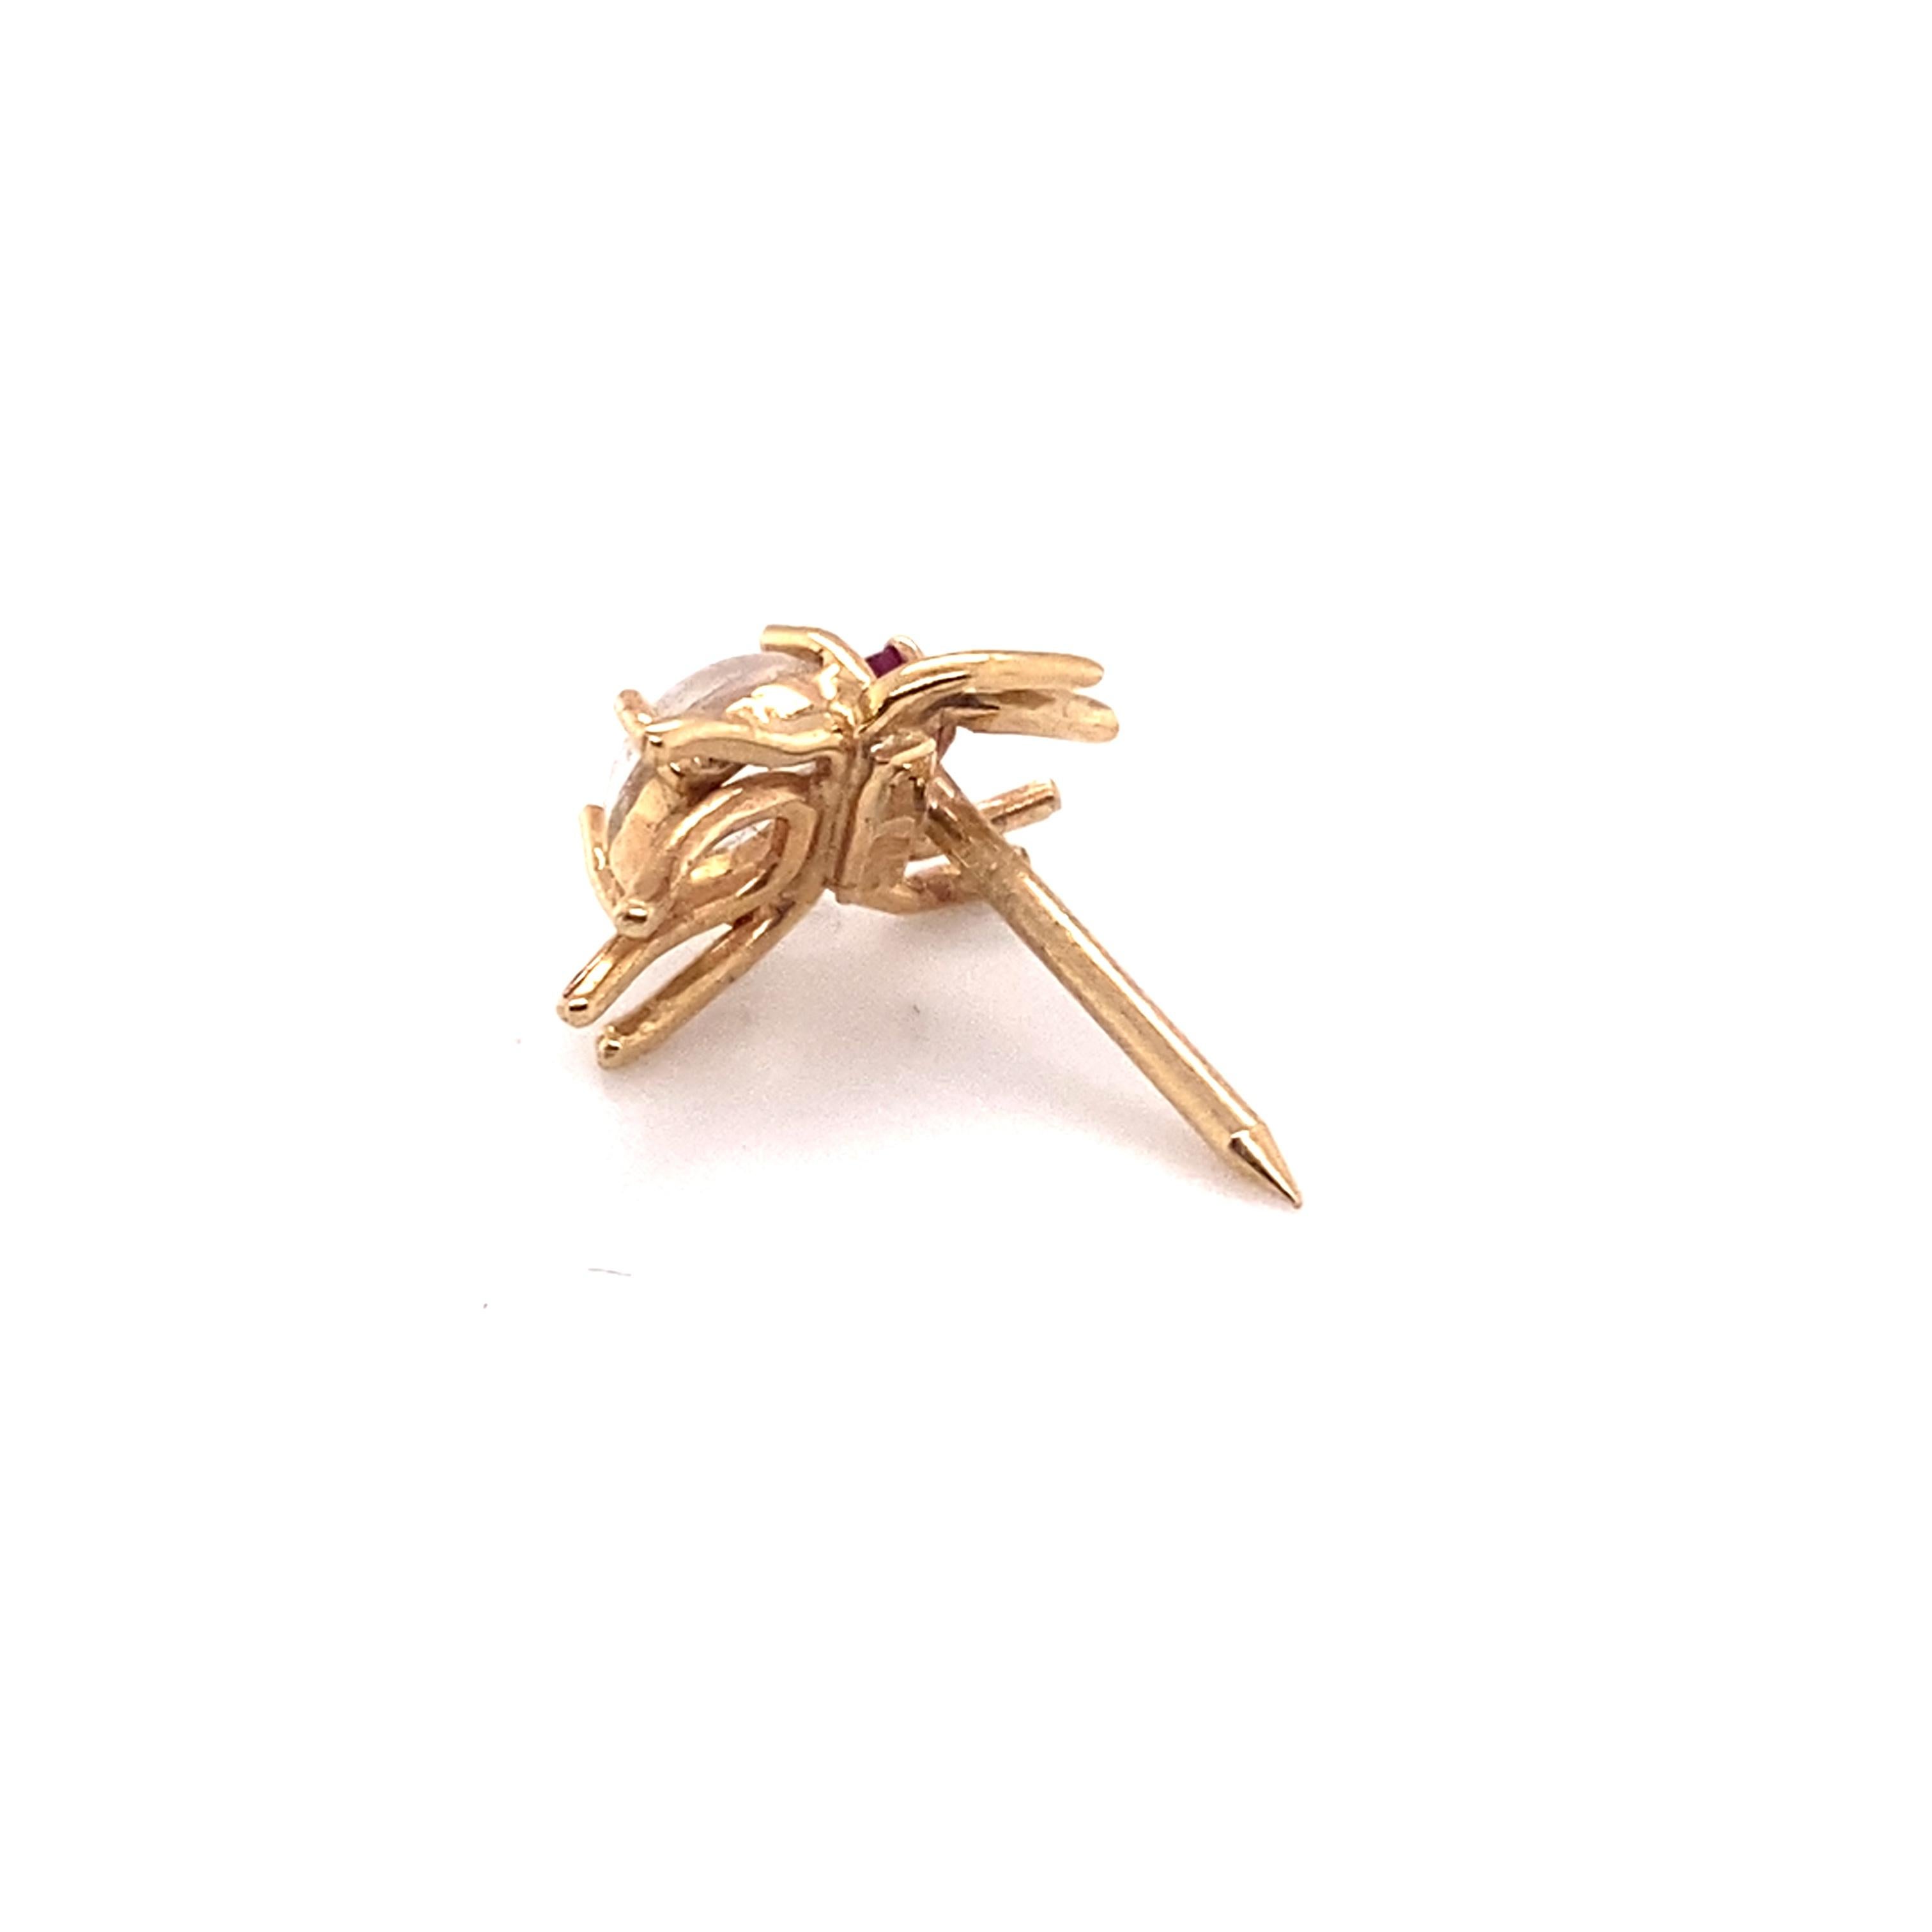 Item Details:
Gemstone: Moonstone & Ruby
Metal Type: 14 Karat Yellow Gold


Item Features: 
This very cute spider pin was made in the 1950s. It features a Cabochon Moonstone in the belly, and a Ruby for the head. the legs and prongs of the pin are